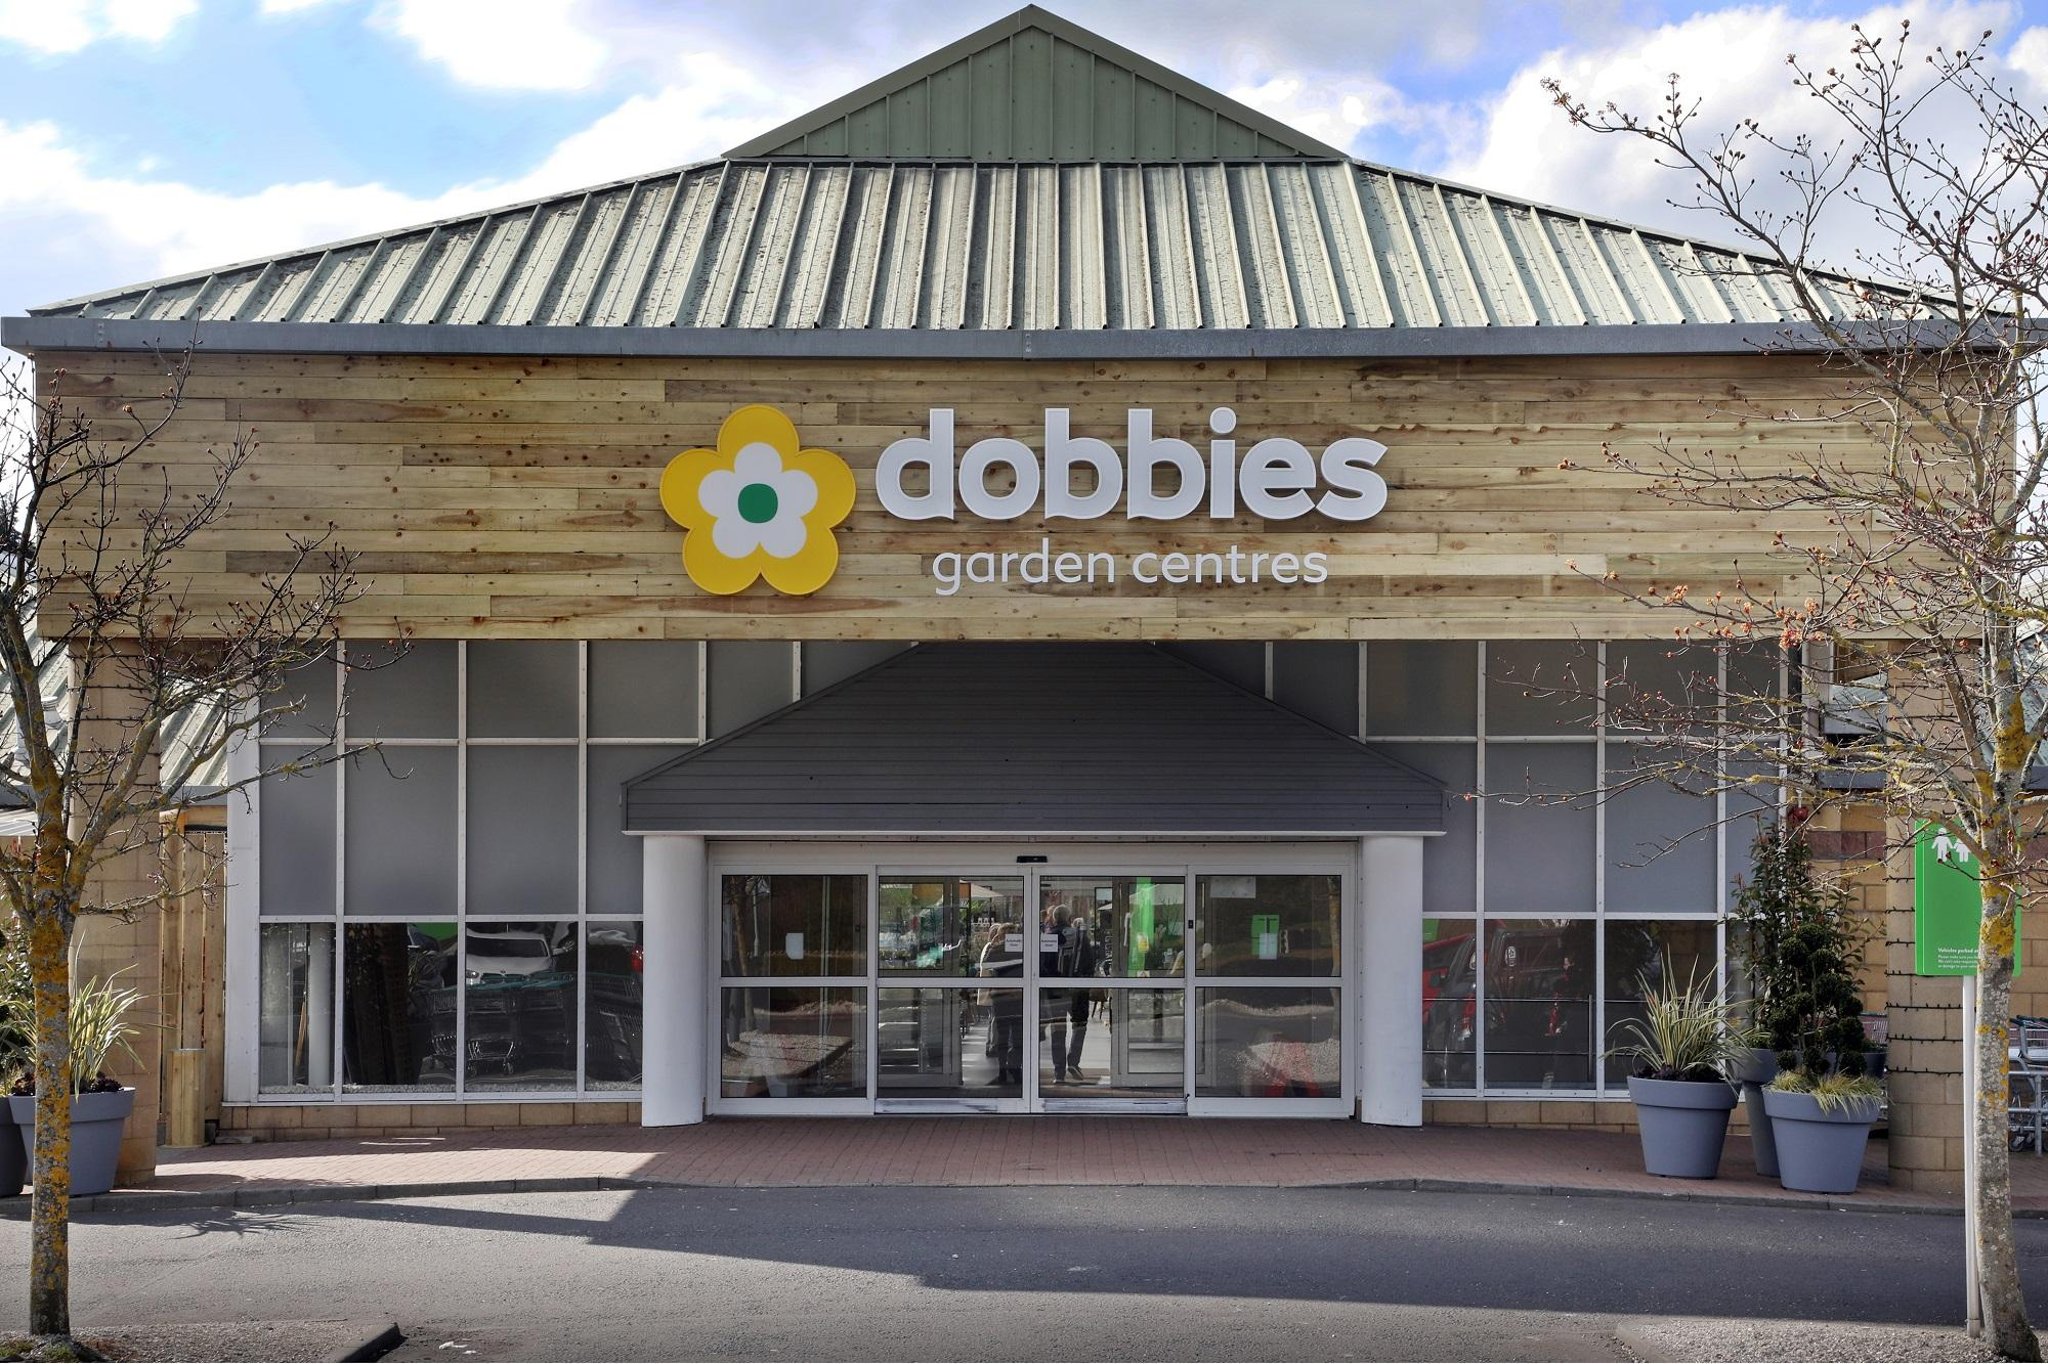 Thousands Of Sainsbury S Products To Be Stocked On Shelves Of Dobbies Garden Centres The Scotsman